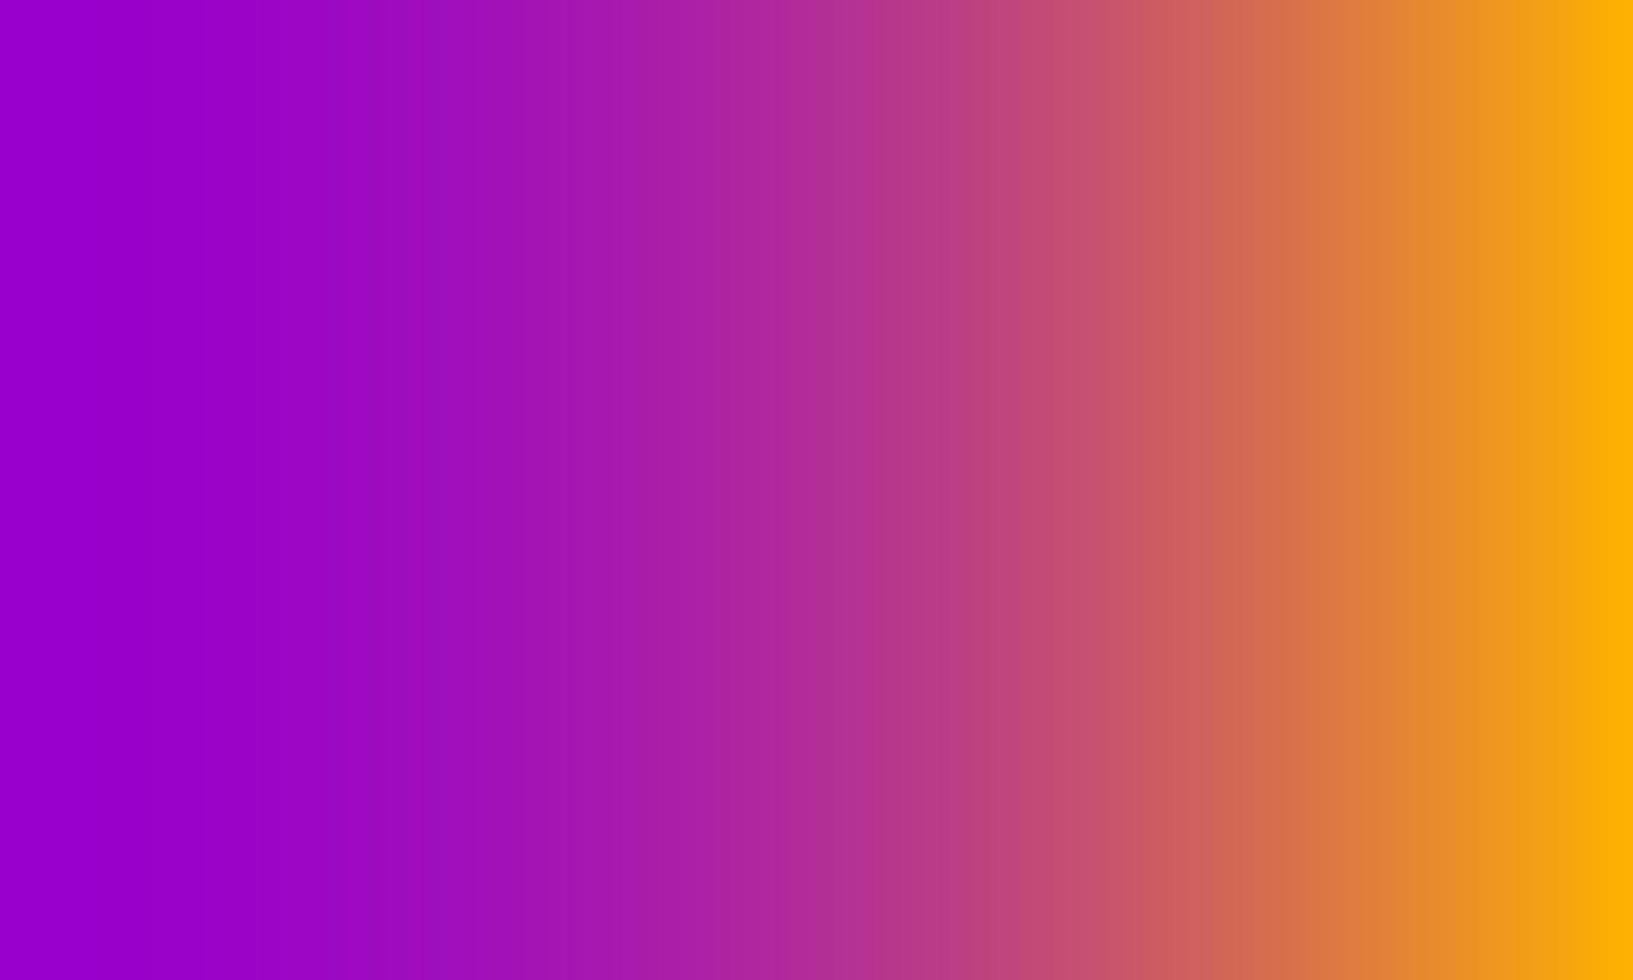 gradient purple and pastel orange. abstract, colorful, simple, cheerful and clean style. suitable for copy space, wallpaper, background, texture, banner, flyer or decor vector